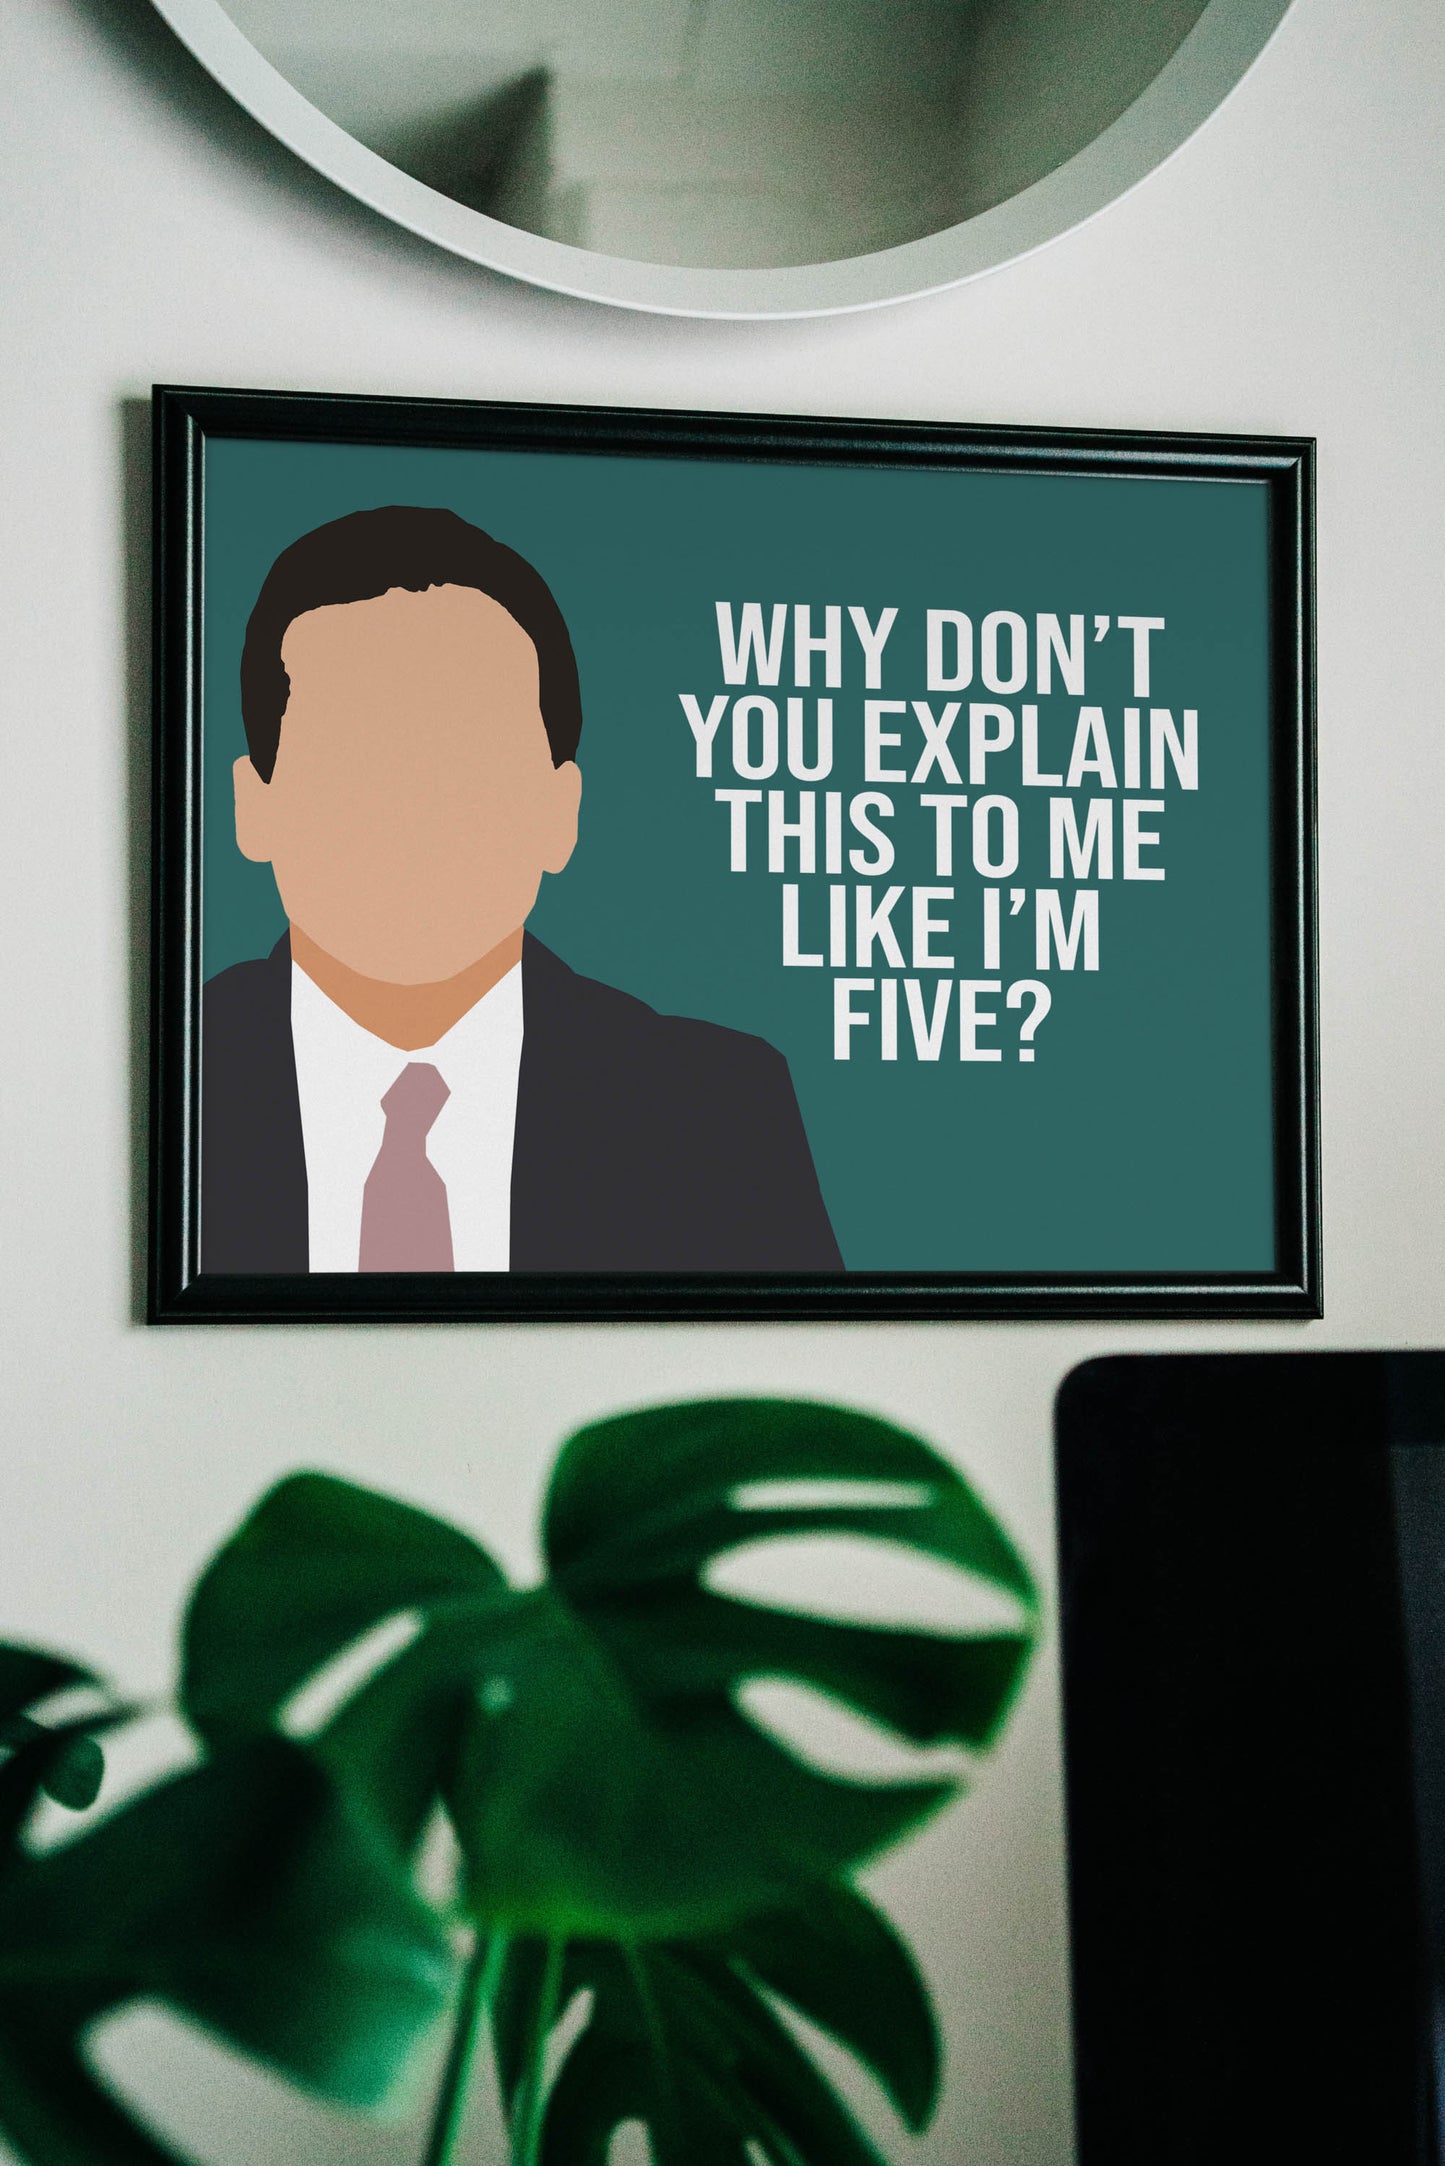 The Office Poster | Michael Scott Quote - "Why don't you explain this to me like I'm five?"